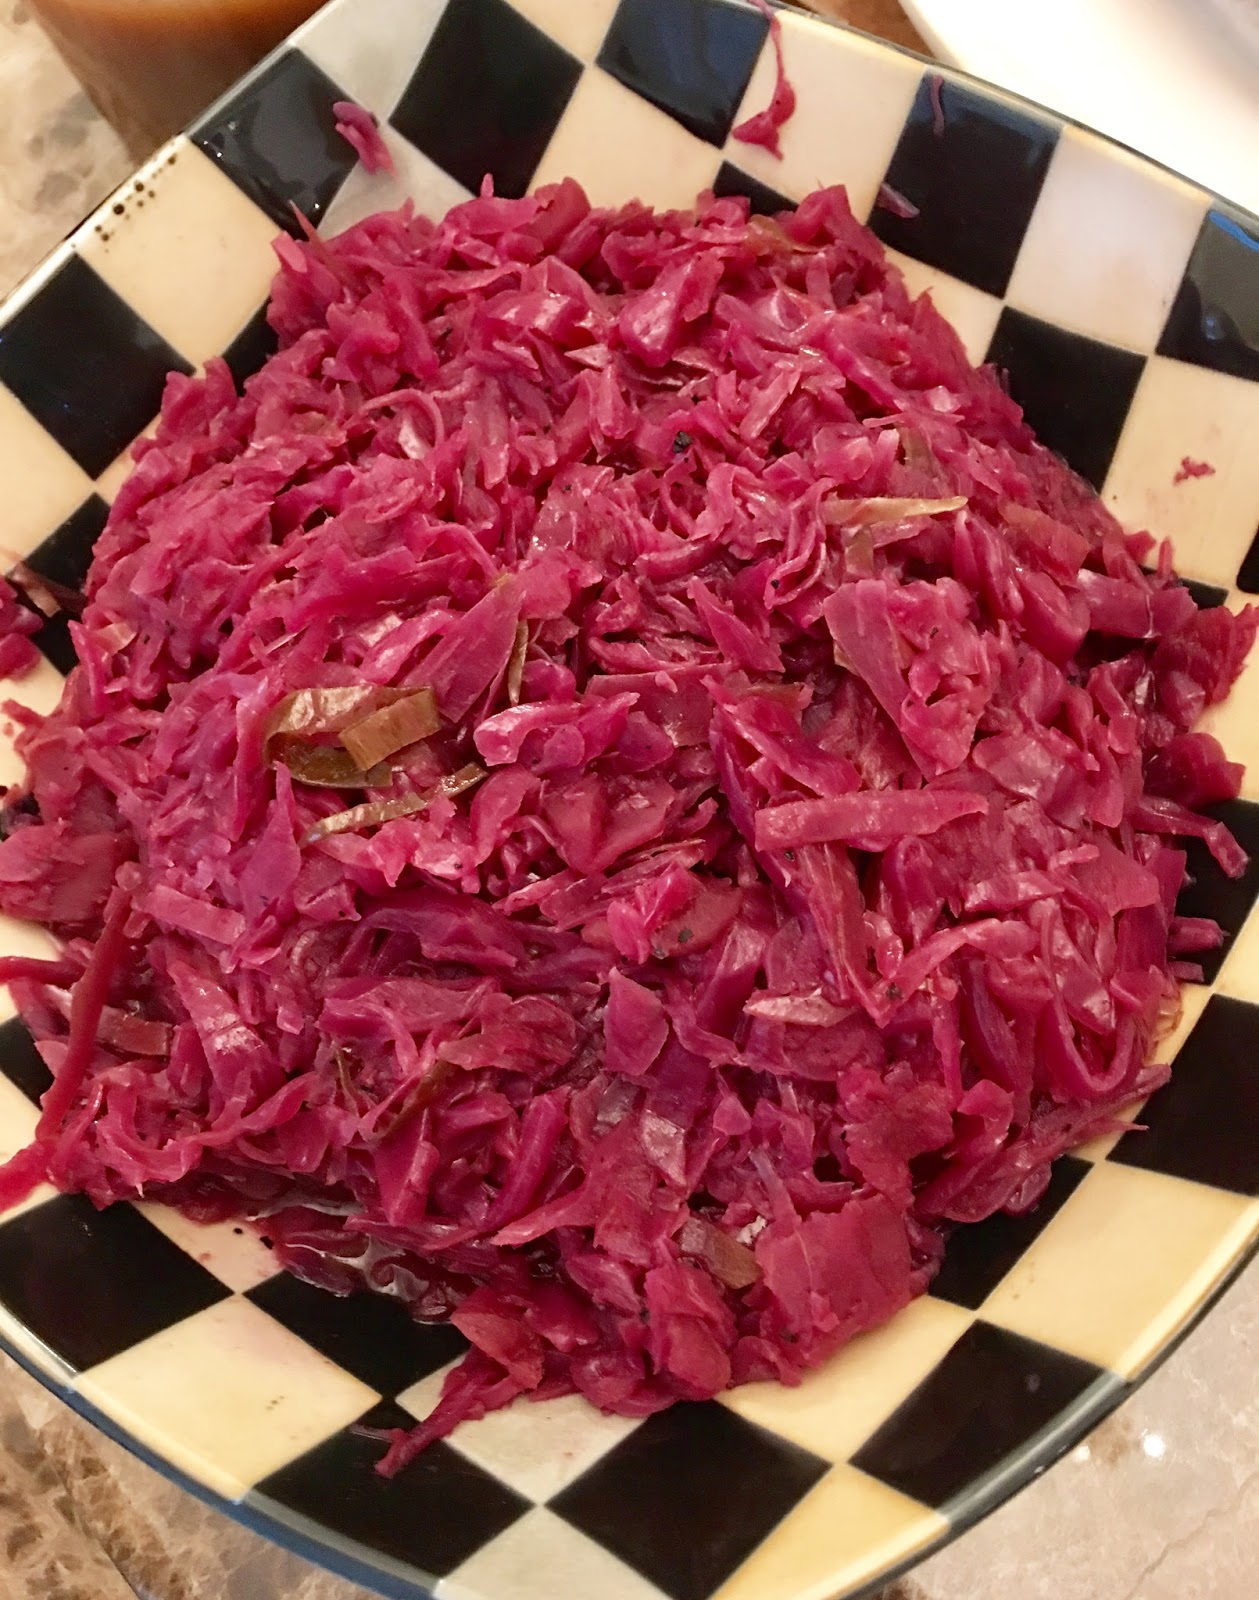 Christmas Braised Red Cabbage with Apples recipe